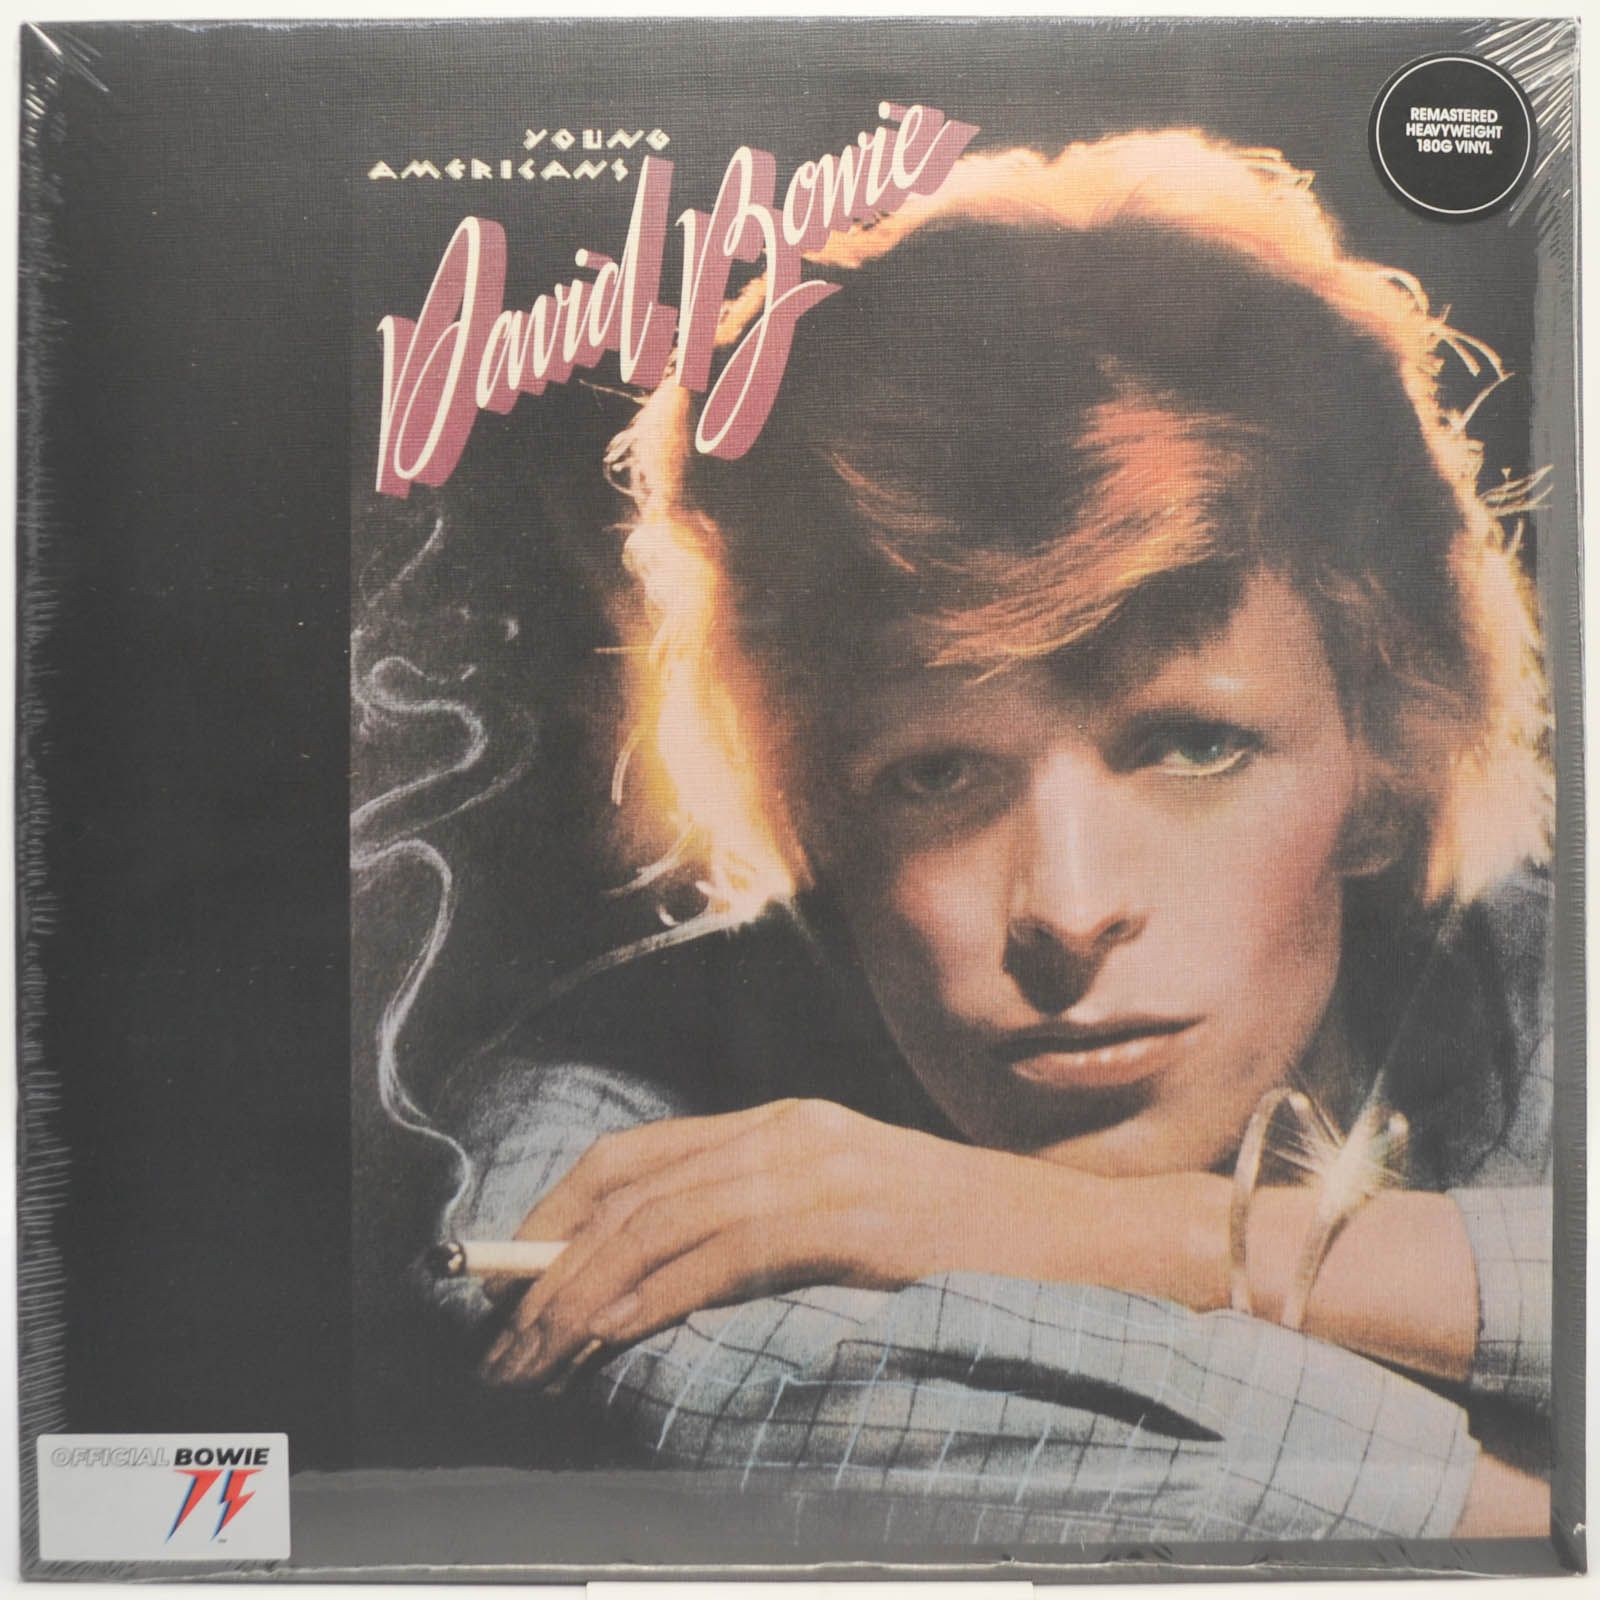 David Bowie — Young Americans, 1975